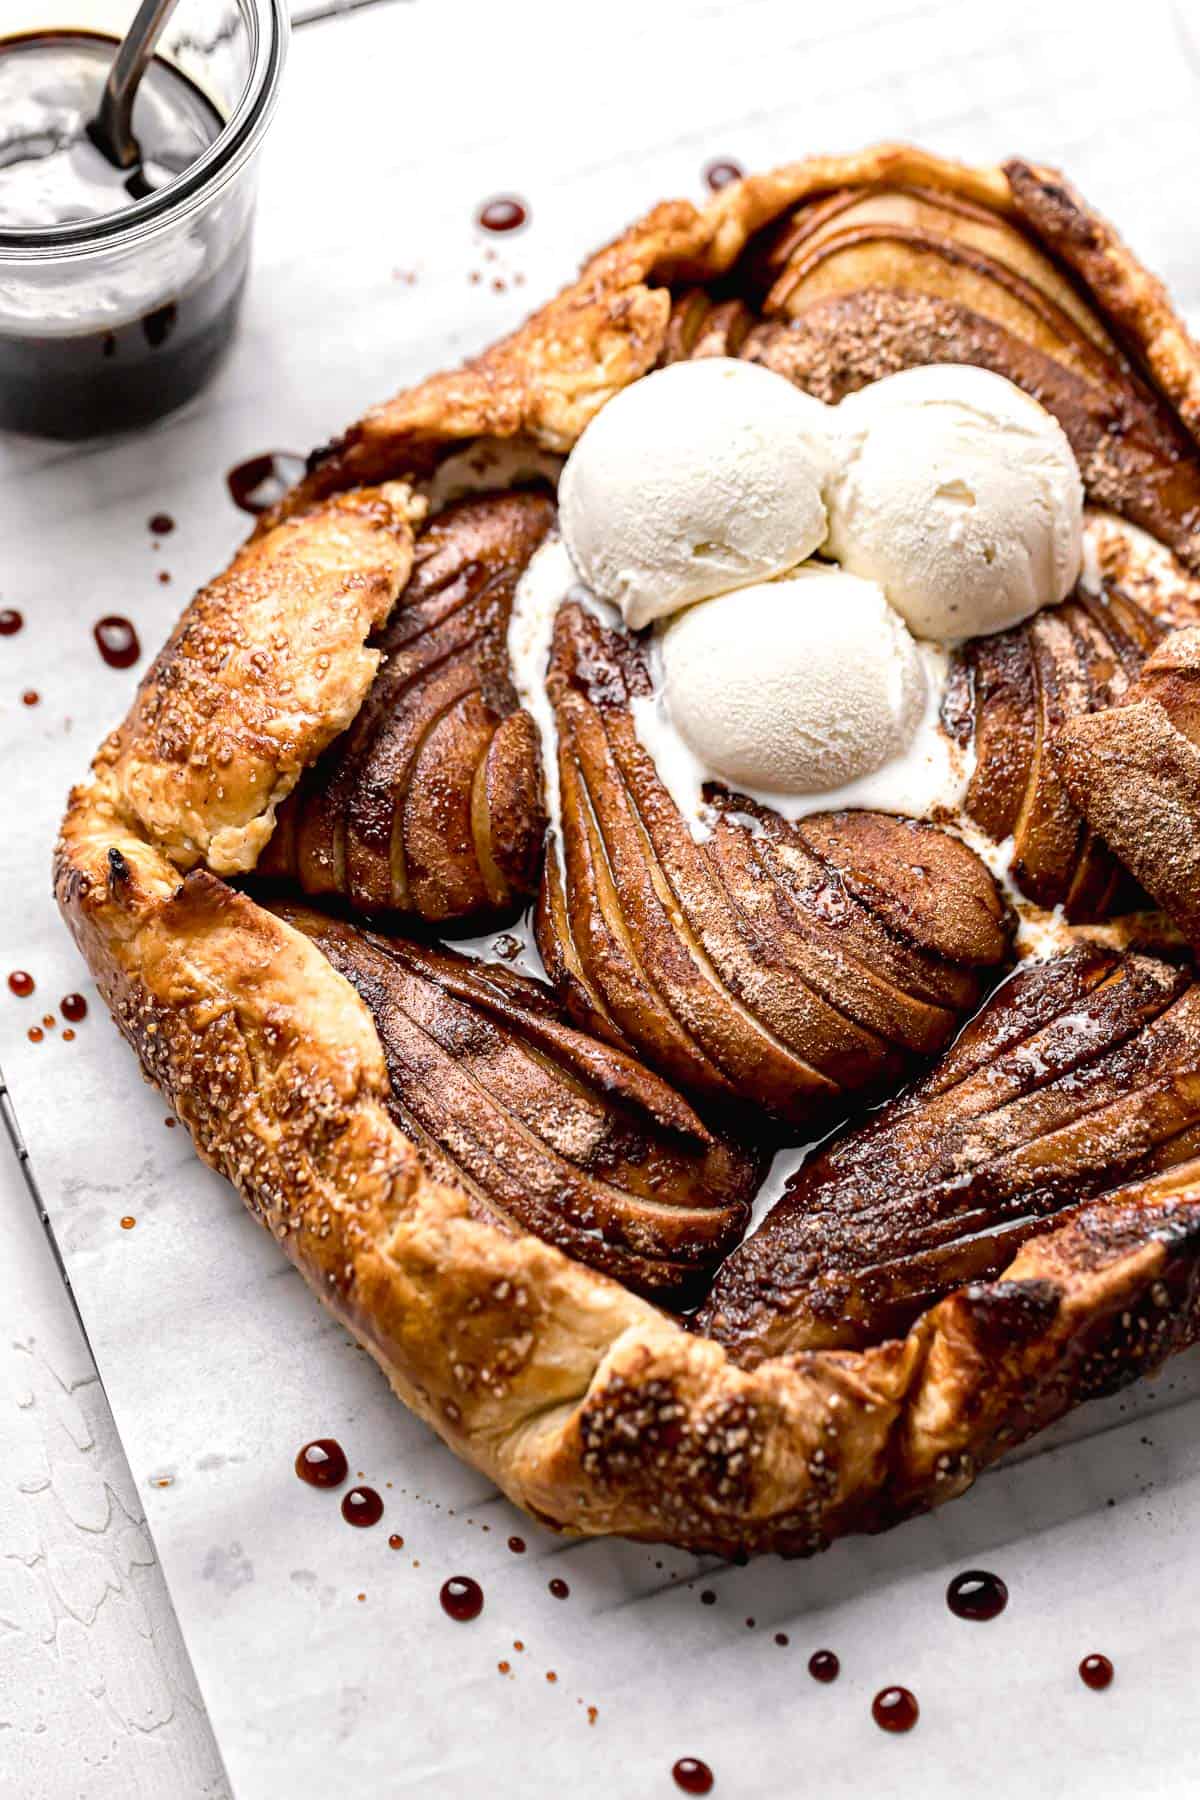 spiced pear galette with ice cream.